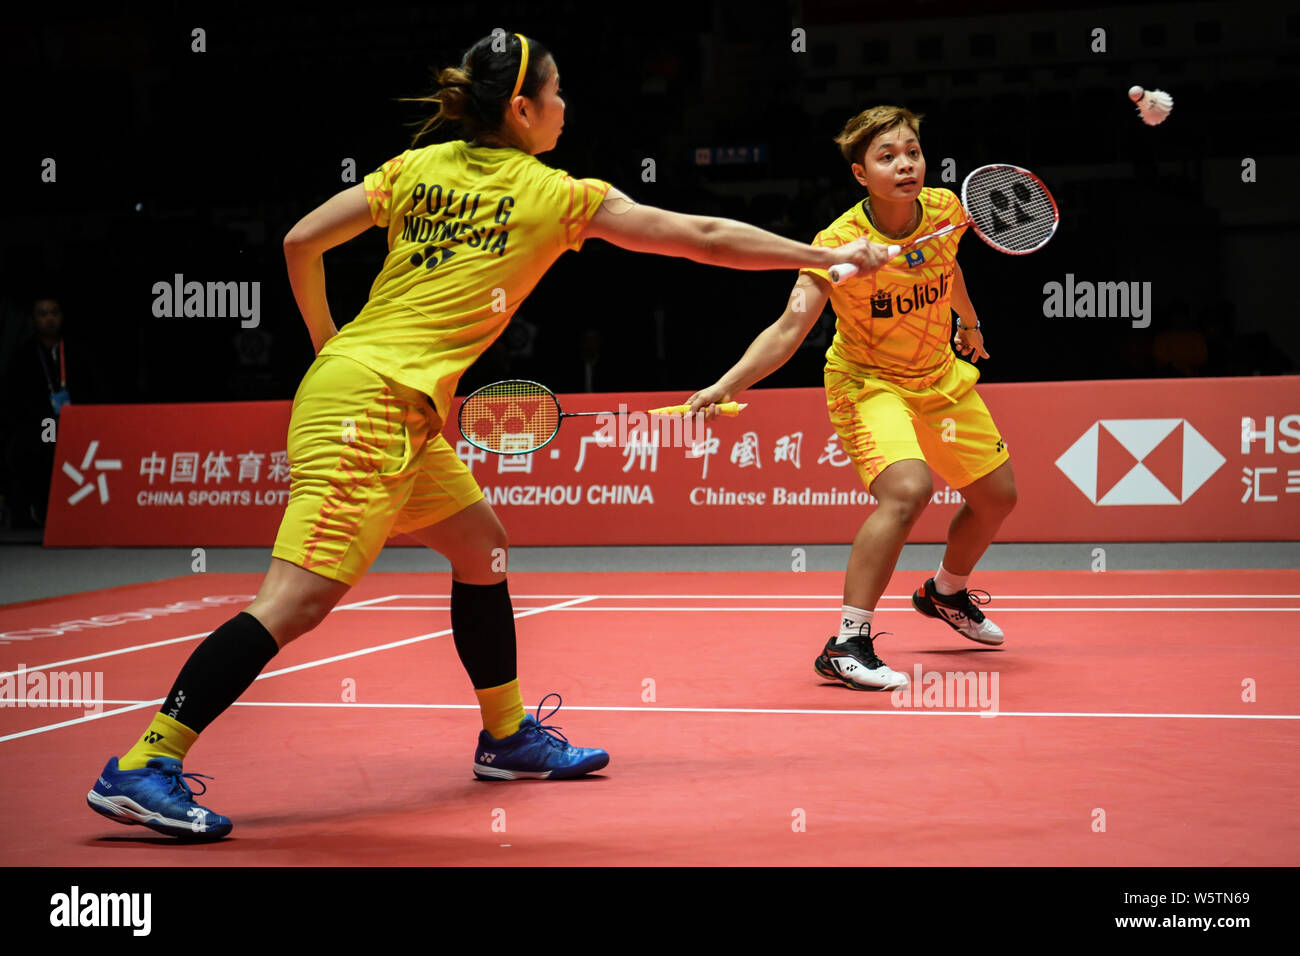 Greysia Polii And Apriyani Rahayu Of Indonesia Return A Shot To Misaki Matsutomo And Ayaka Takahashi Of Japan In Their Women S Doubles Group A Match D Stock Photo Alamy